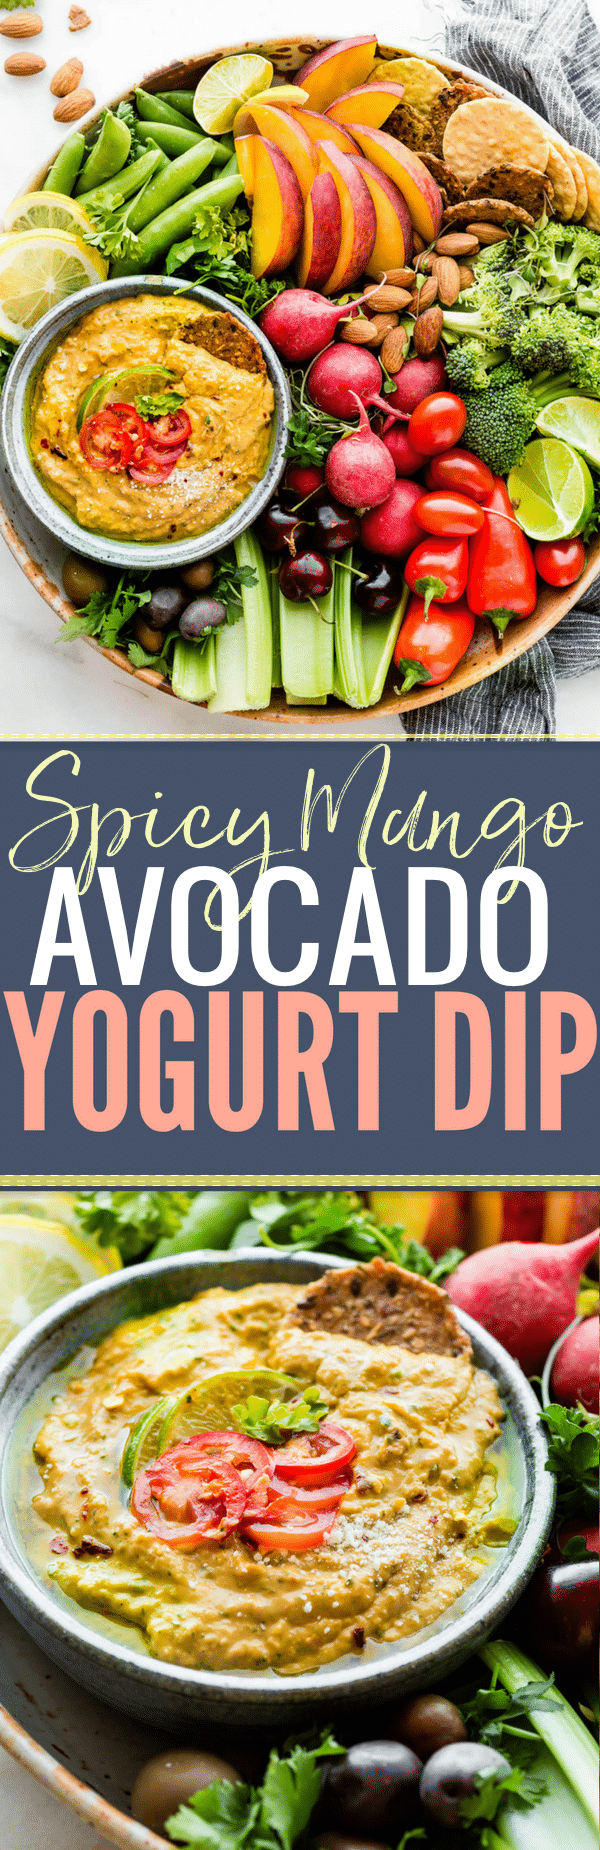 This Spicy mango avocado yogurt dip is NOT your average healthy appetizer! It’s A NEW TASTY way to eat veggies! Mango, yogurt, avocado, and a kick of spice from chilis makes this easy snack recipe a protein rich dip! www.cottercrunch.com